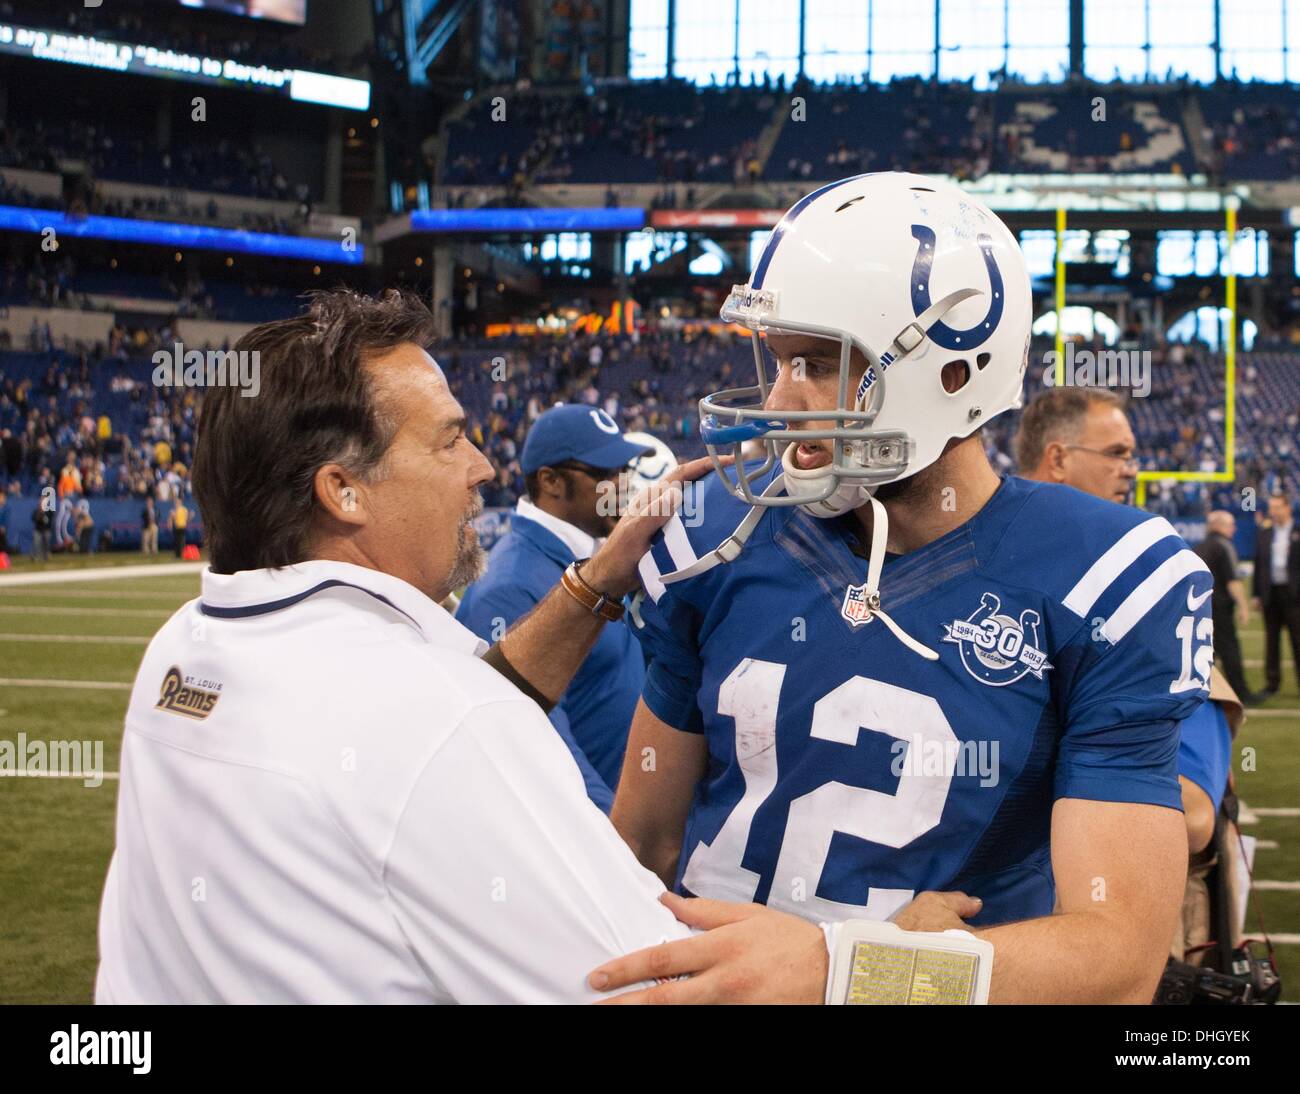 Indianapolis, OH, USA. 10th Nov, 2013. November 10, 2013: Indianapolis Colts quarterback Andrew Luck (12) meets with St. Louis Rams head coach Jeff Fisher at midfield after the NFL game between the St. Louis Rams and the Indianapolis Colts at Lucas Oil Stadium in Indianapolis, IN. The St. Louis Rams defeated the Indianapolis Colts 38-8. © csm/Alamy Live News Stock Photo